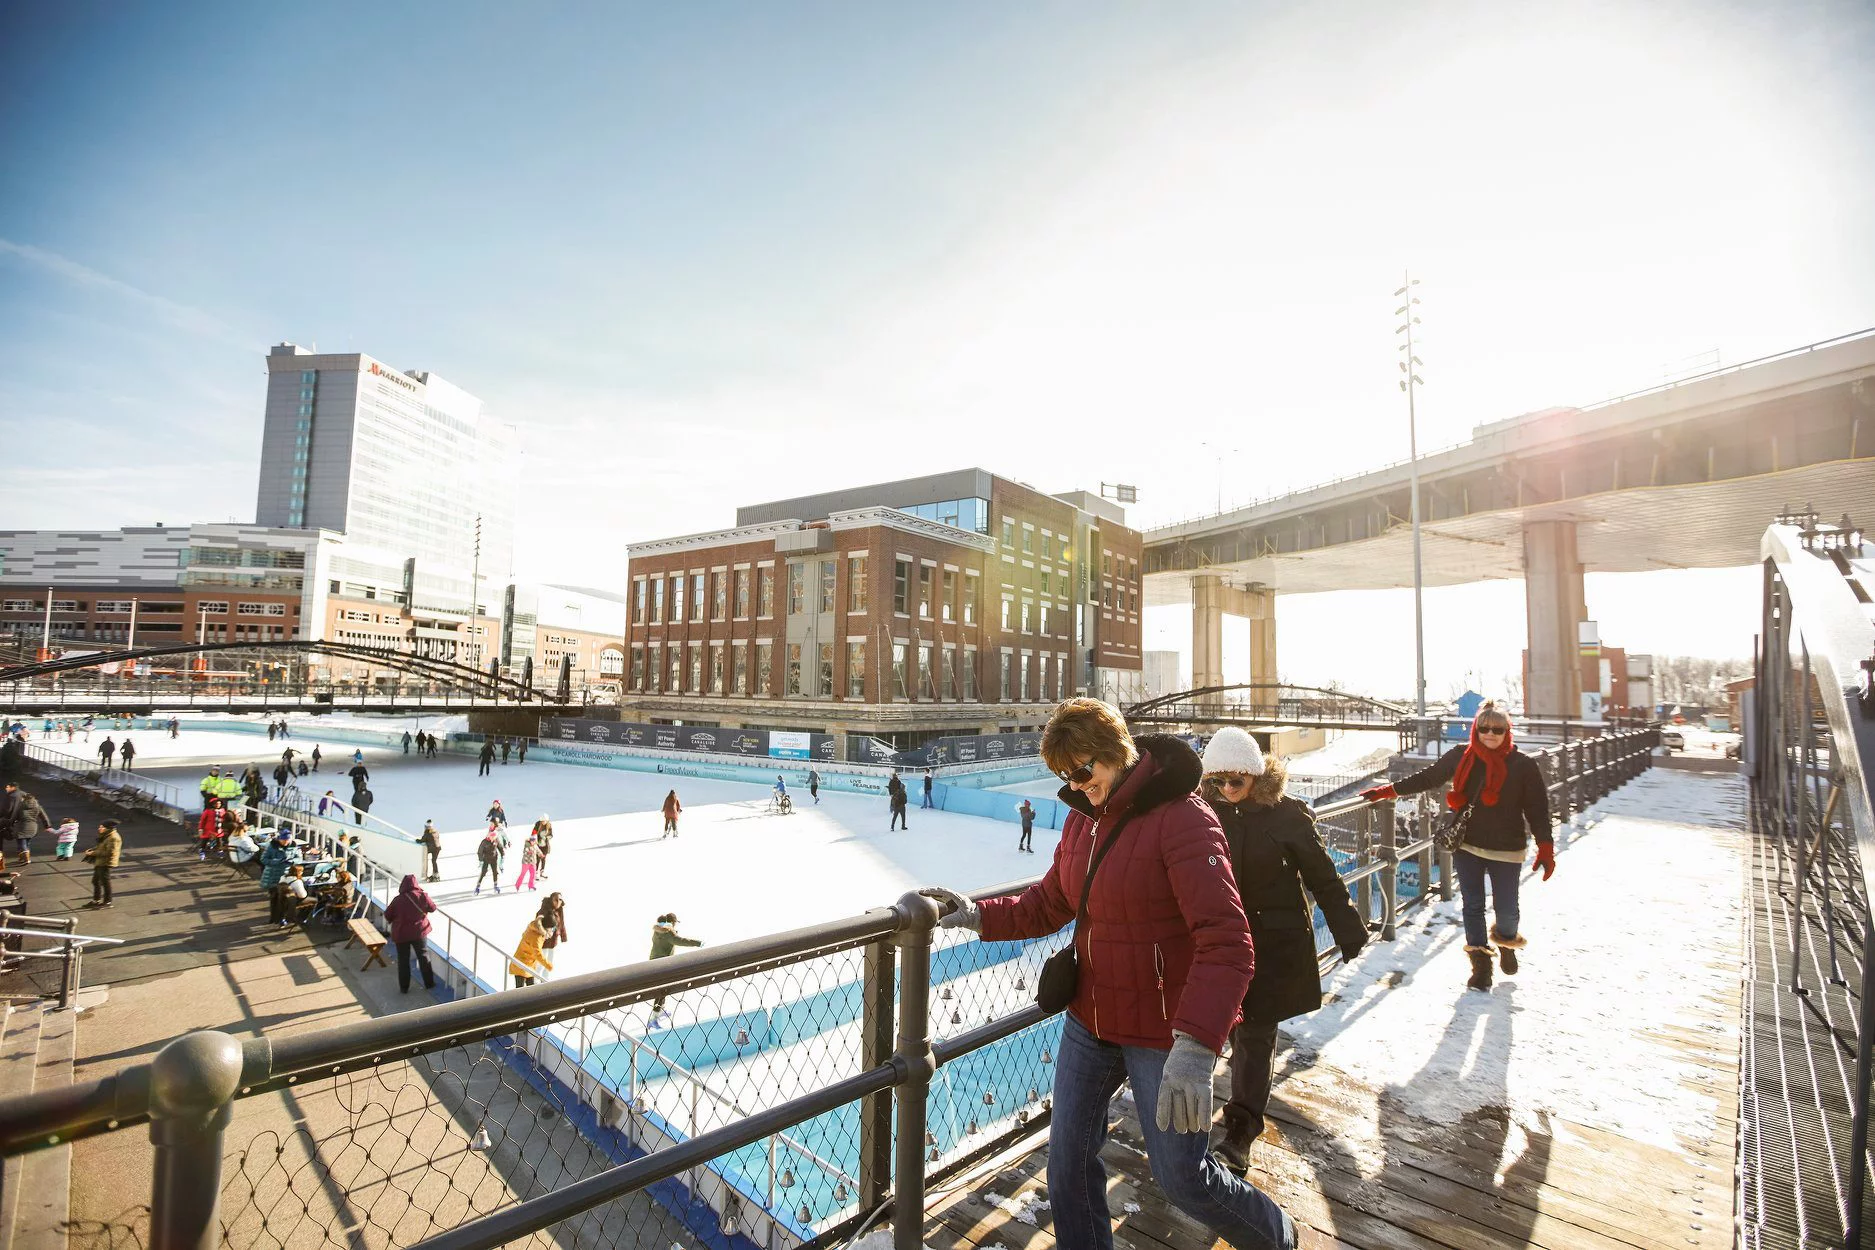 Things to Do at Canalside this Winter